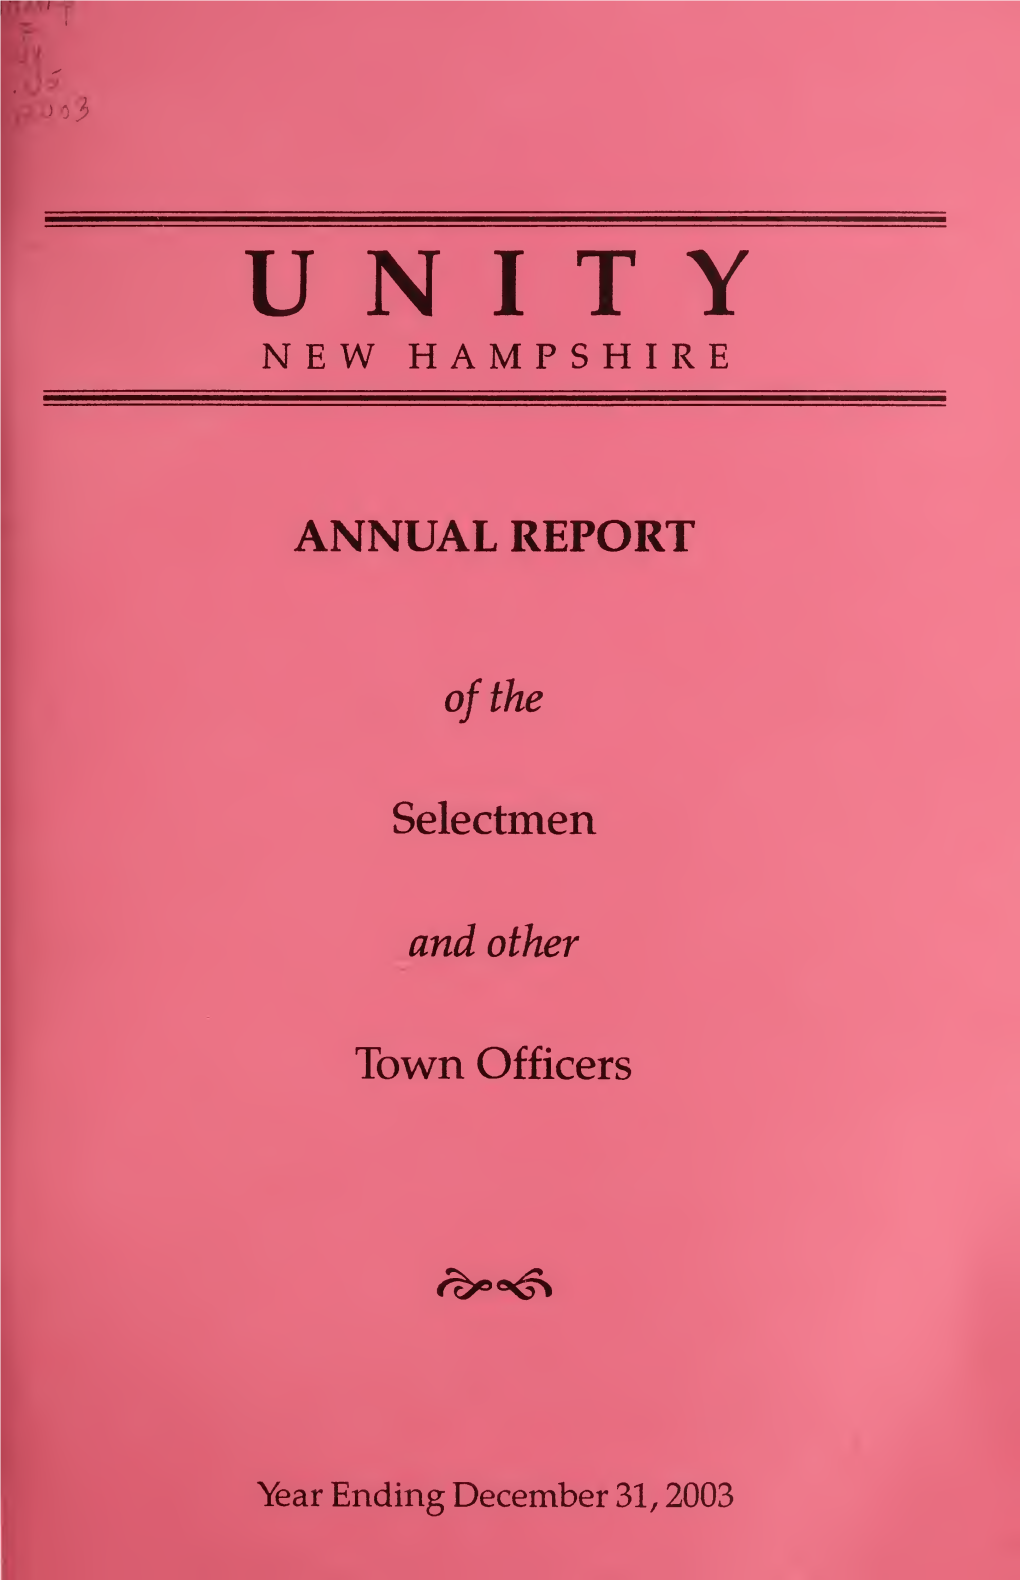 Annual Report of the Town of Unity, New Hampshire